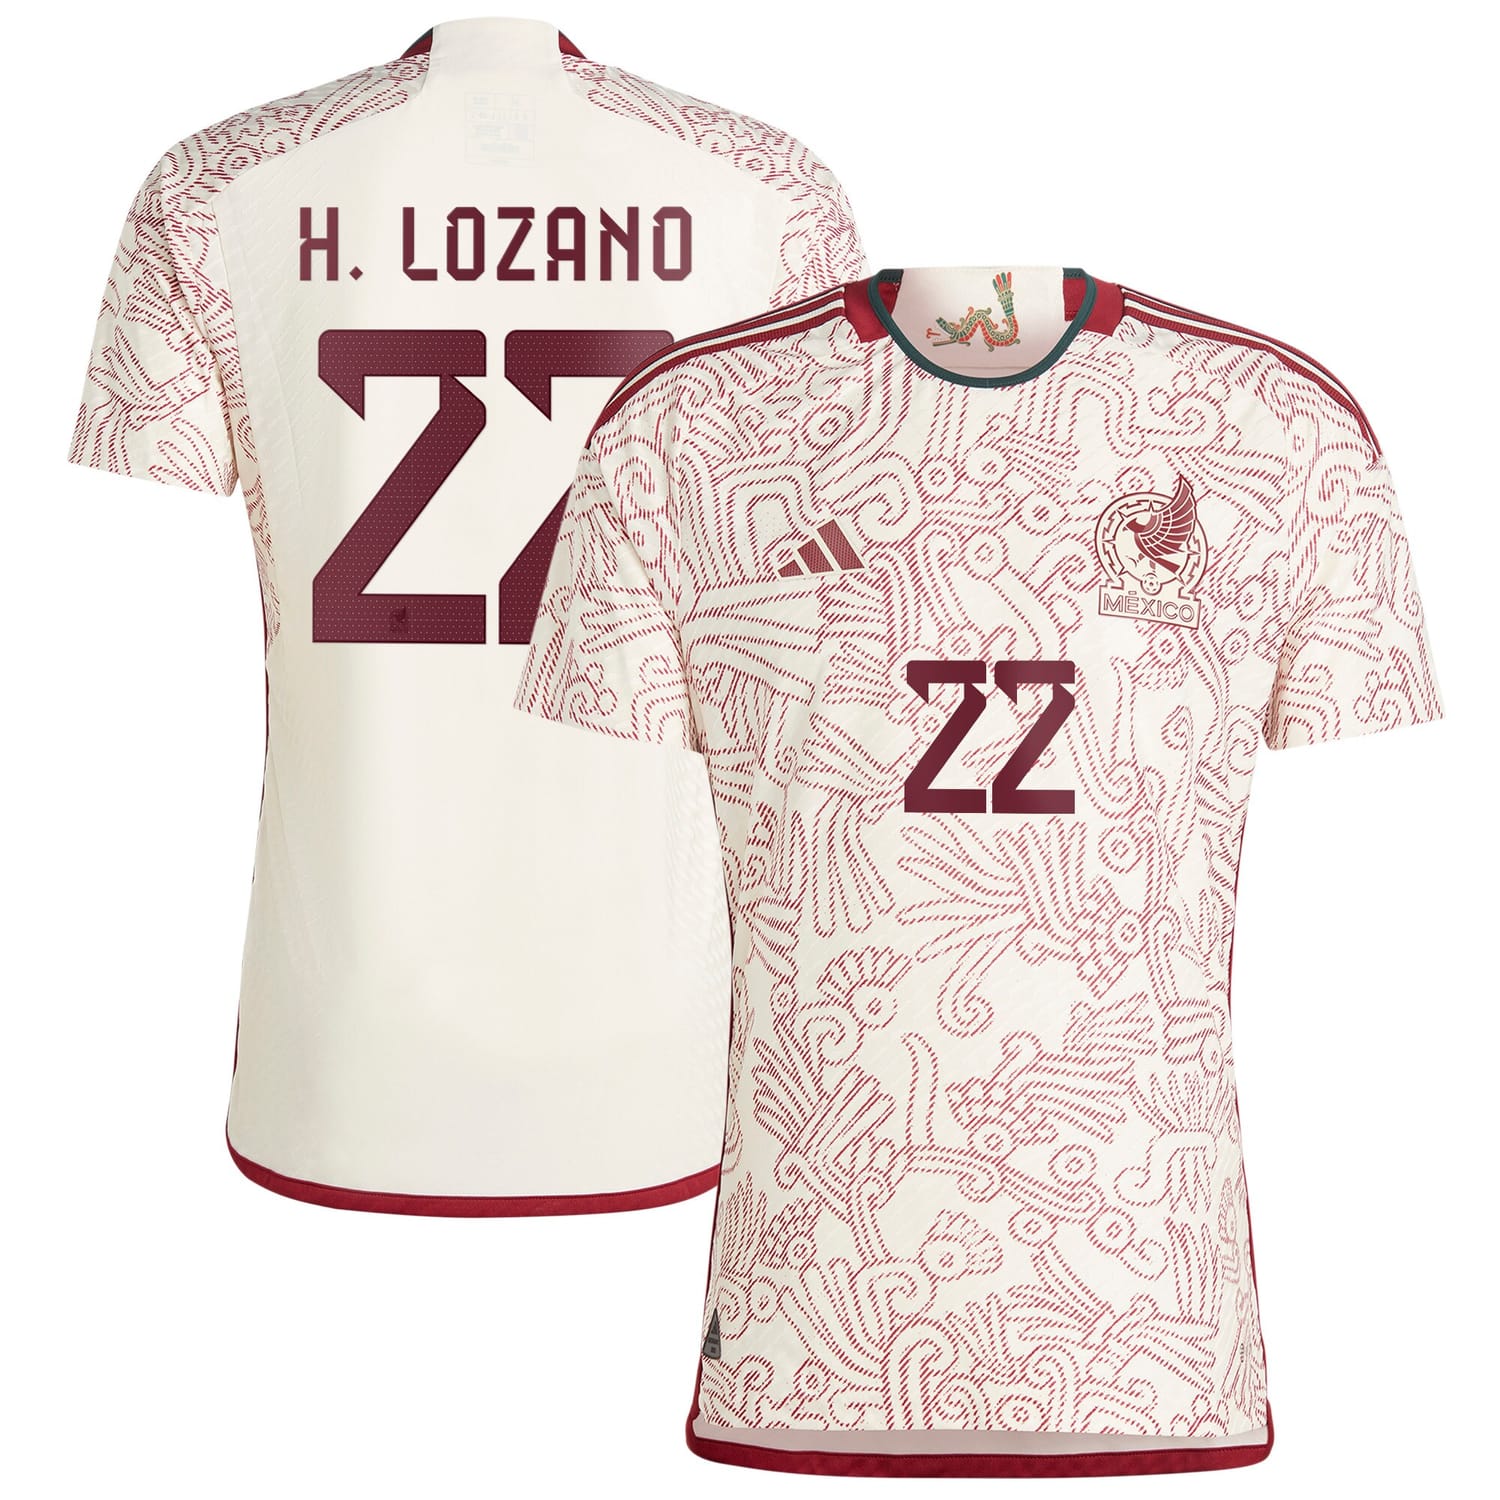 Mexico National Team Away Authentic Jersey Shirt White 2022-23 player Hirving Lozano printing for Men